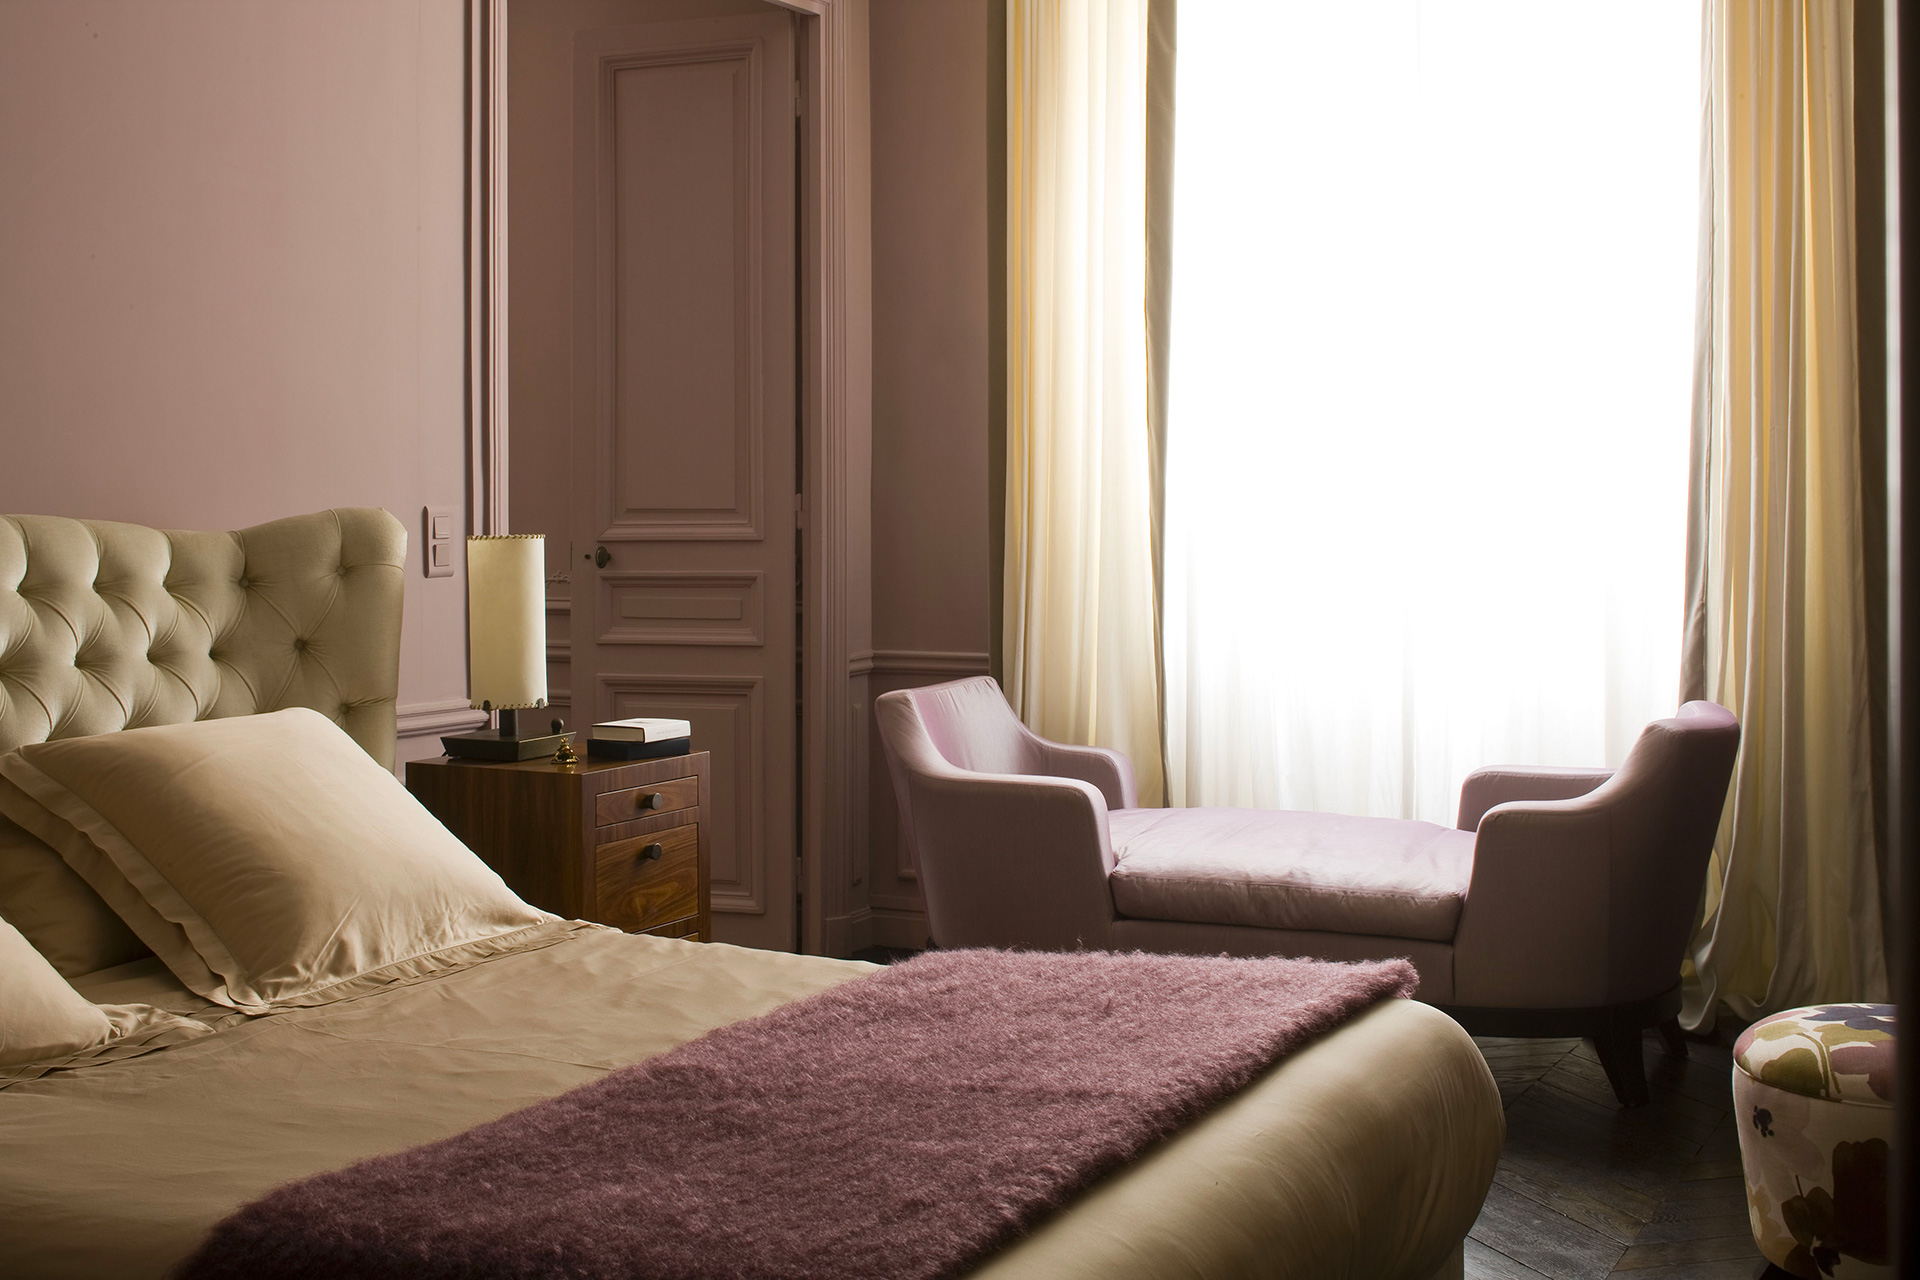 Bedroom of a private residence in Paris furnished with Promemoria | Promemoria